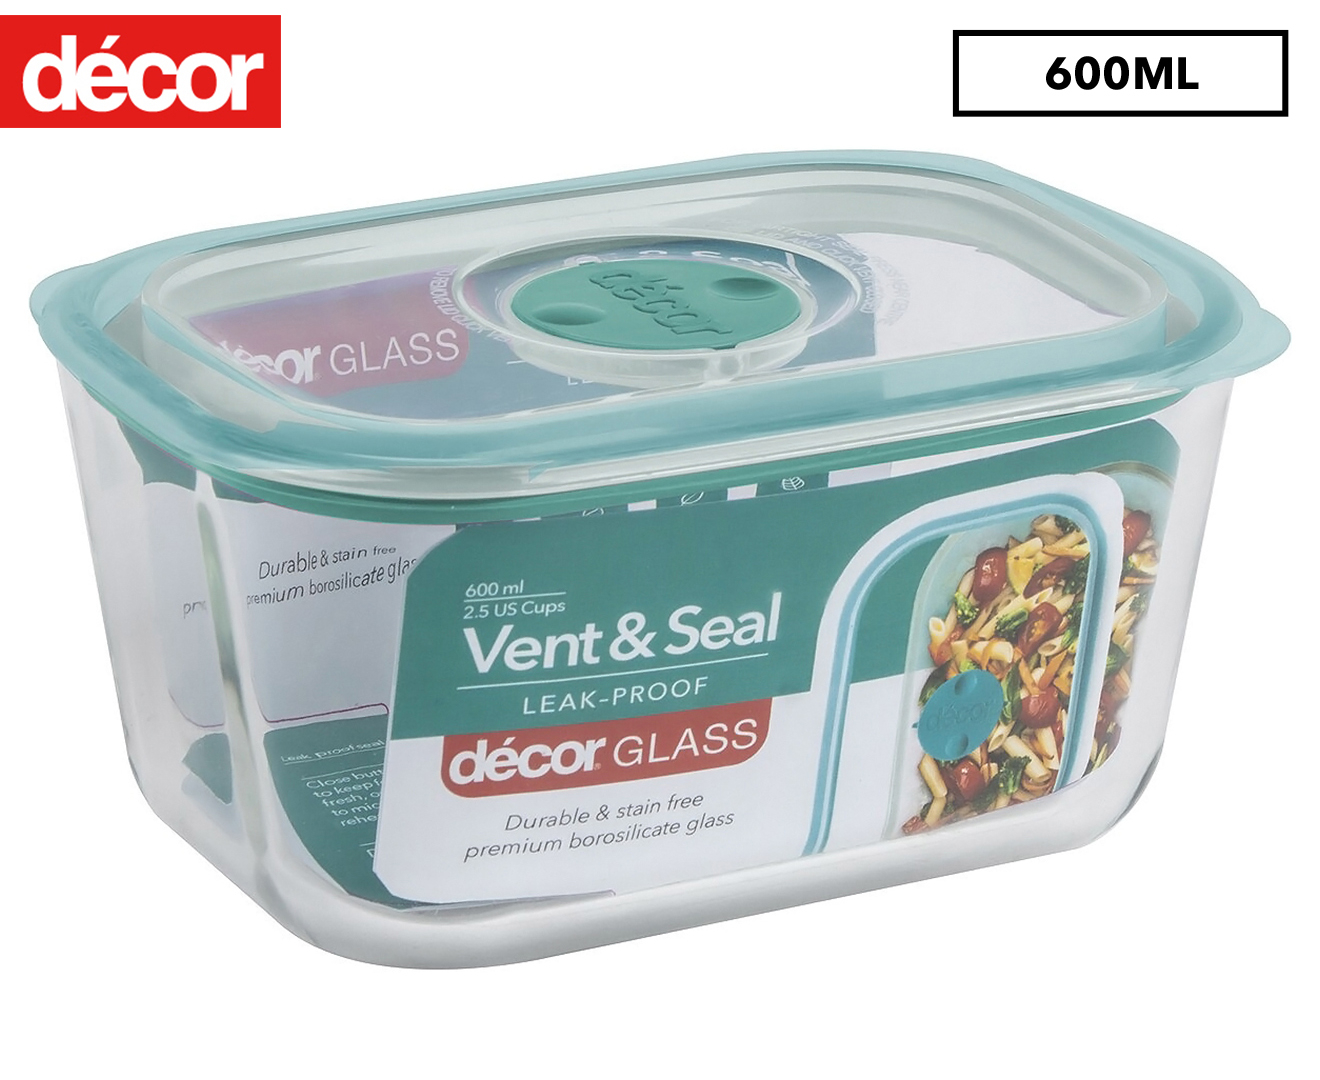 Décor 600mL Vent & Seal Oblong Glass Container - Clear/Teal ...